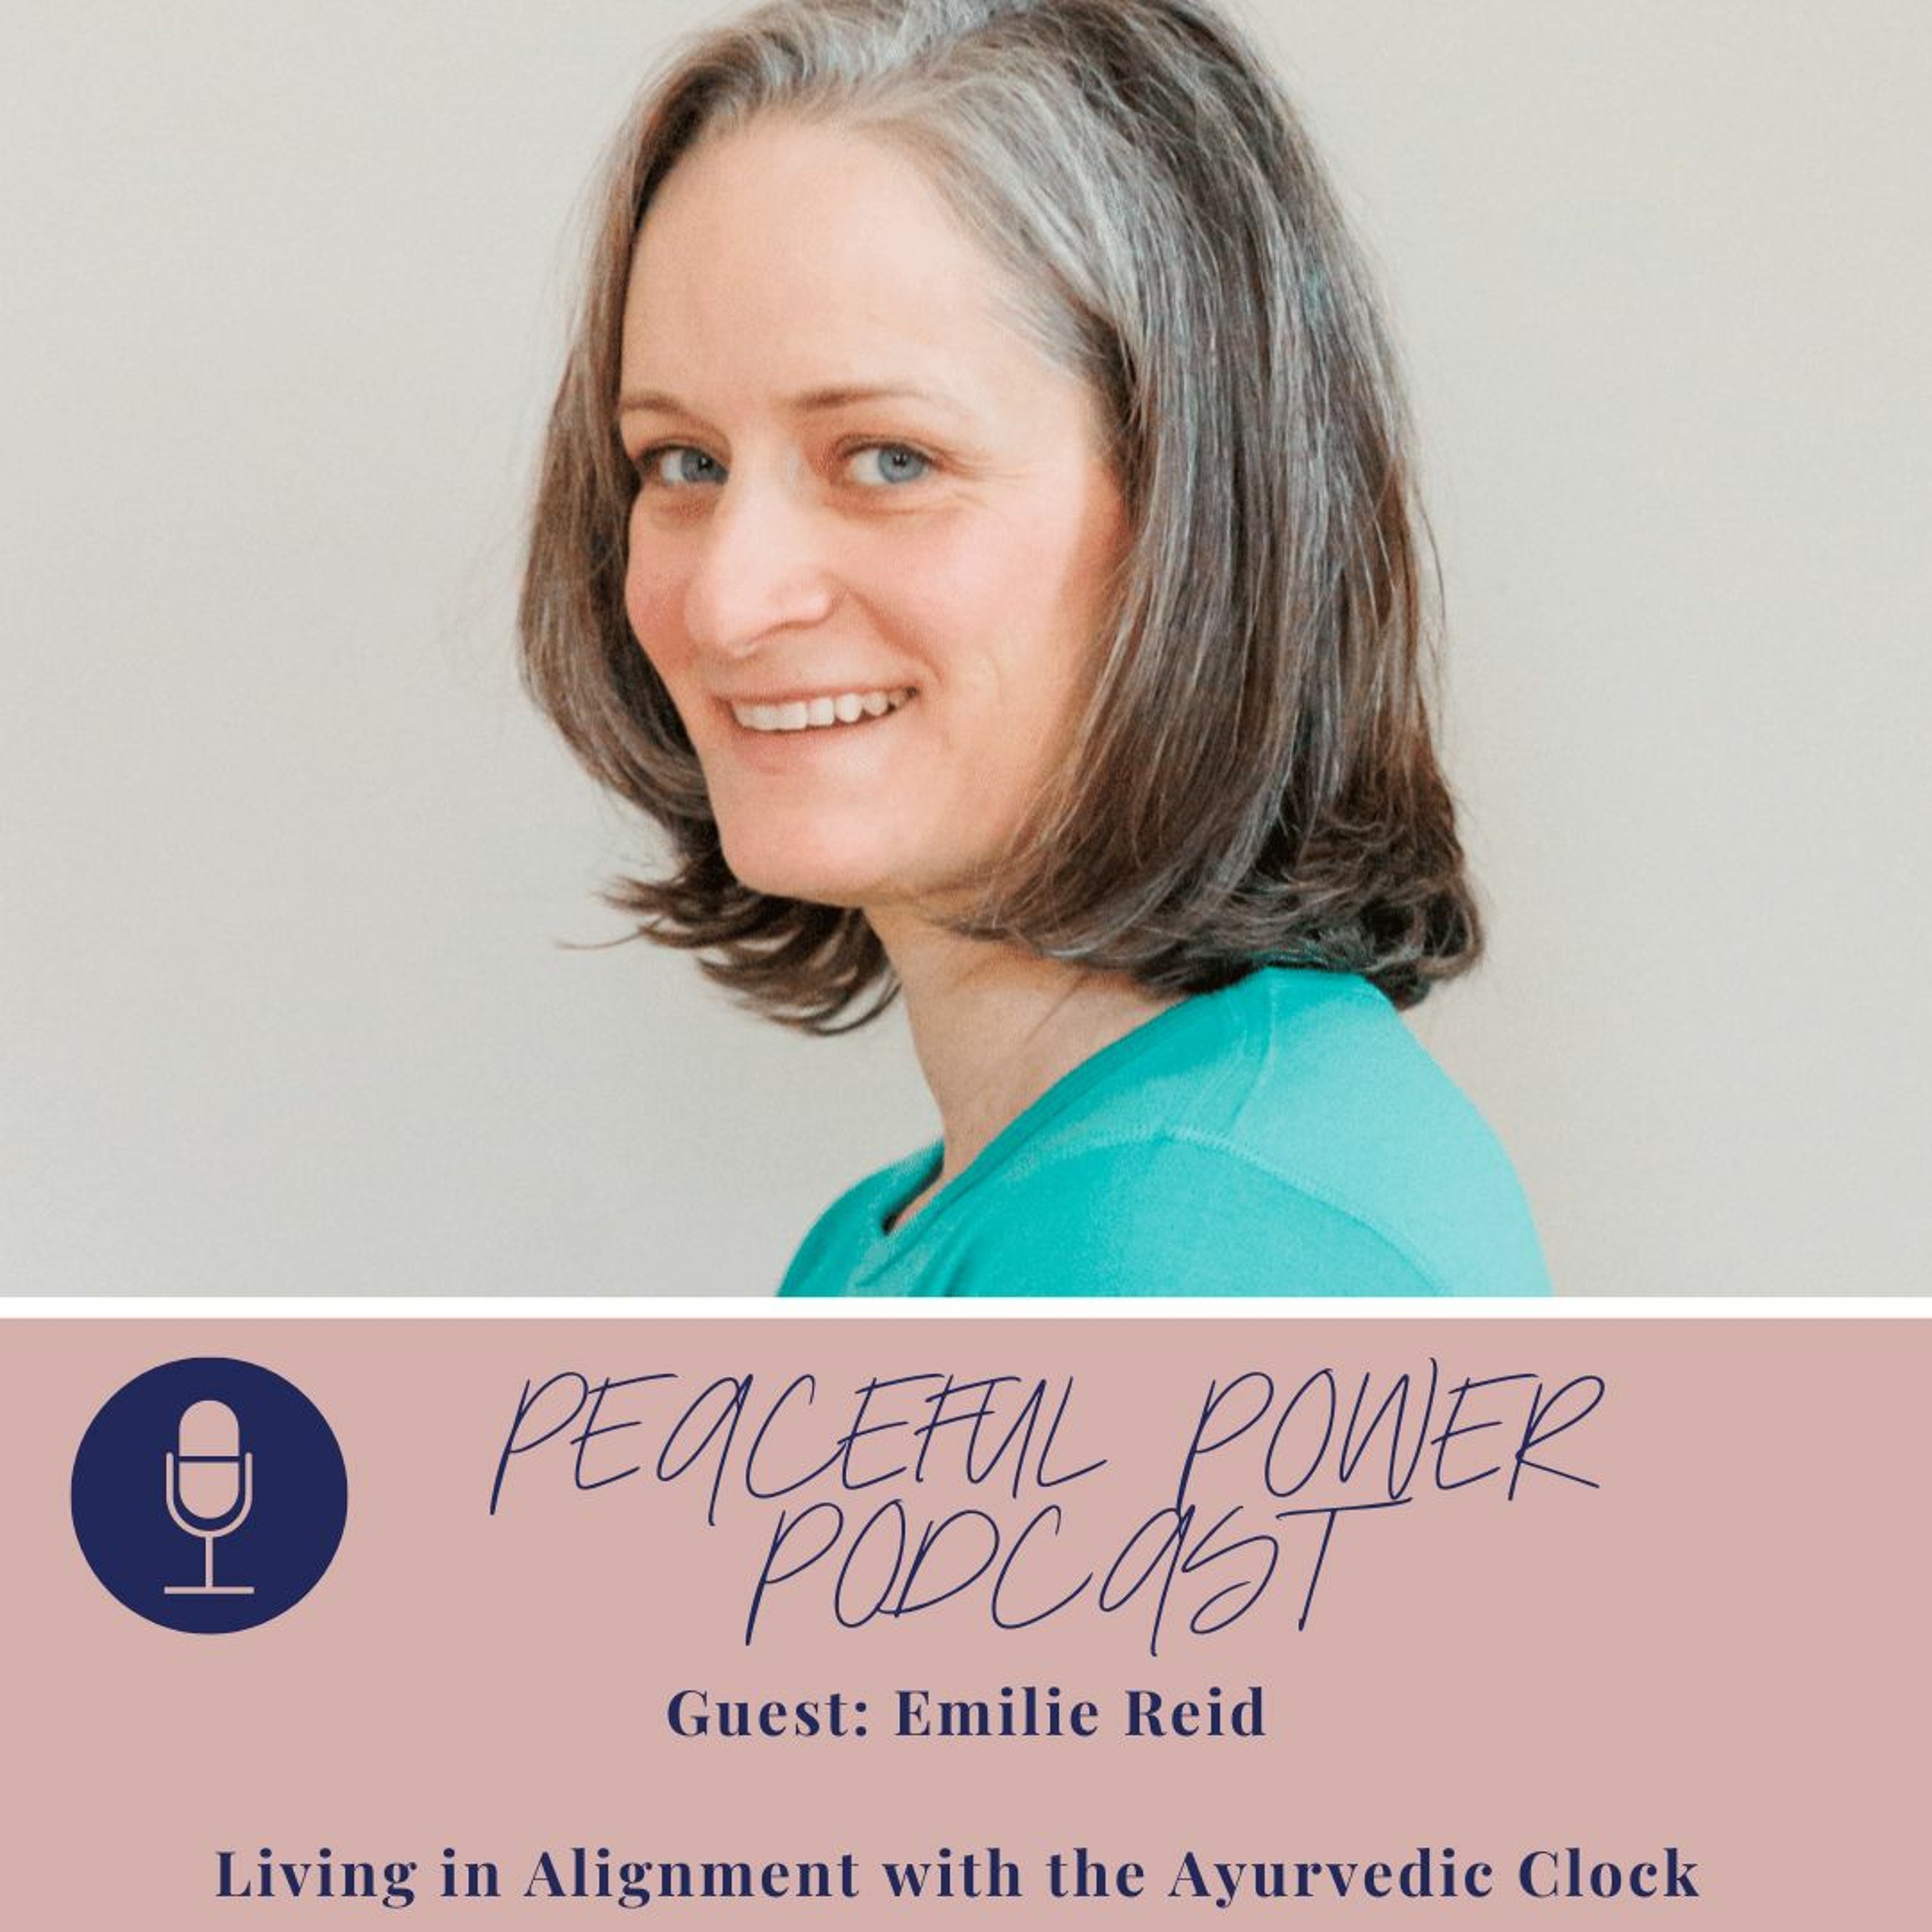 Emilie Reid on Living in Alignment with the Ayurvedic Clock